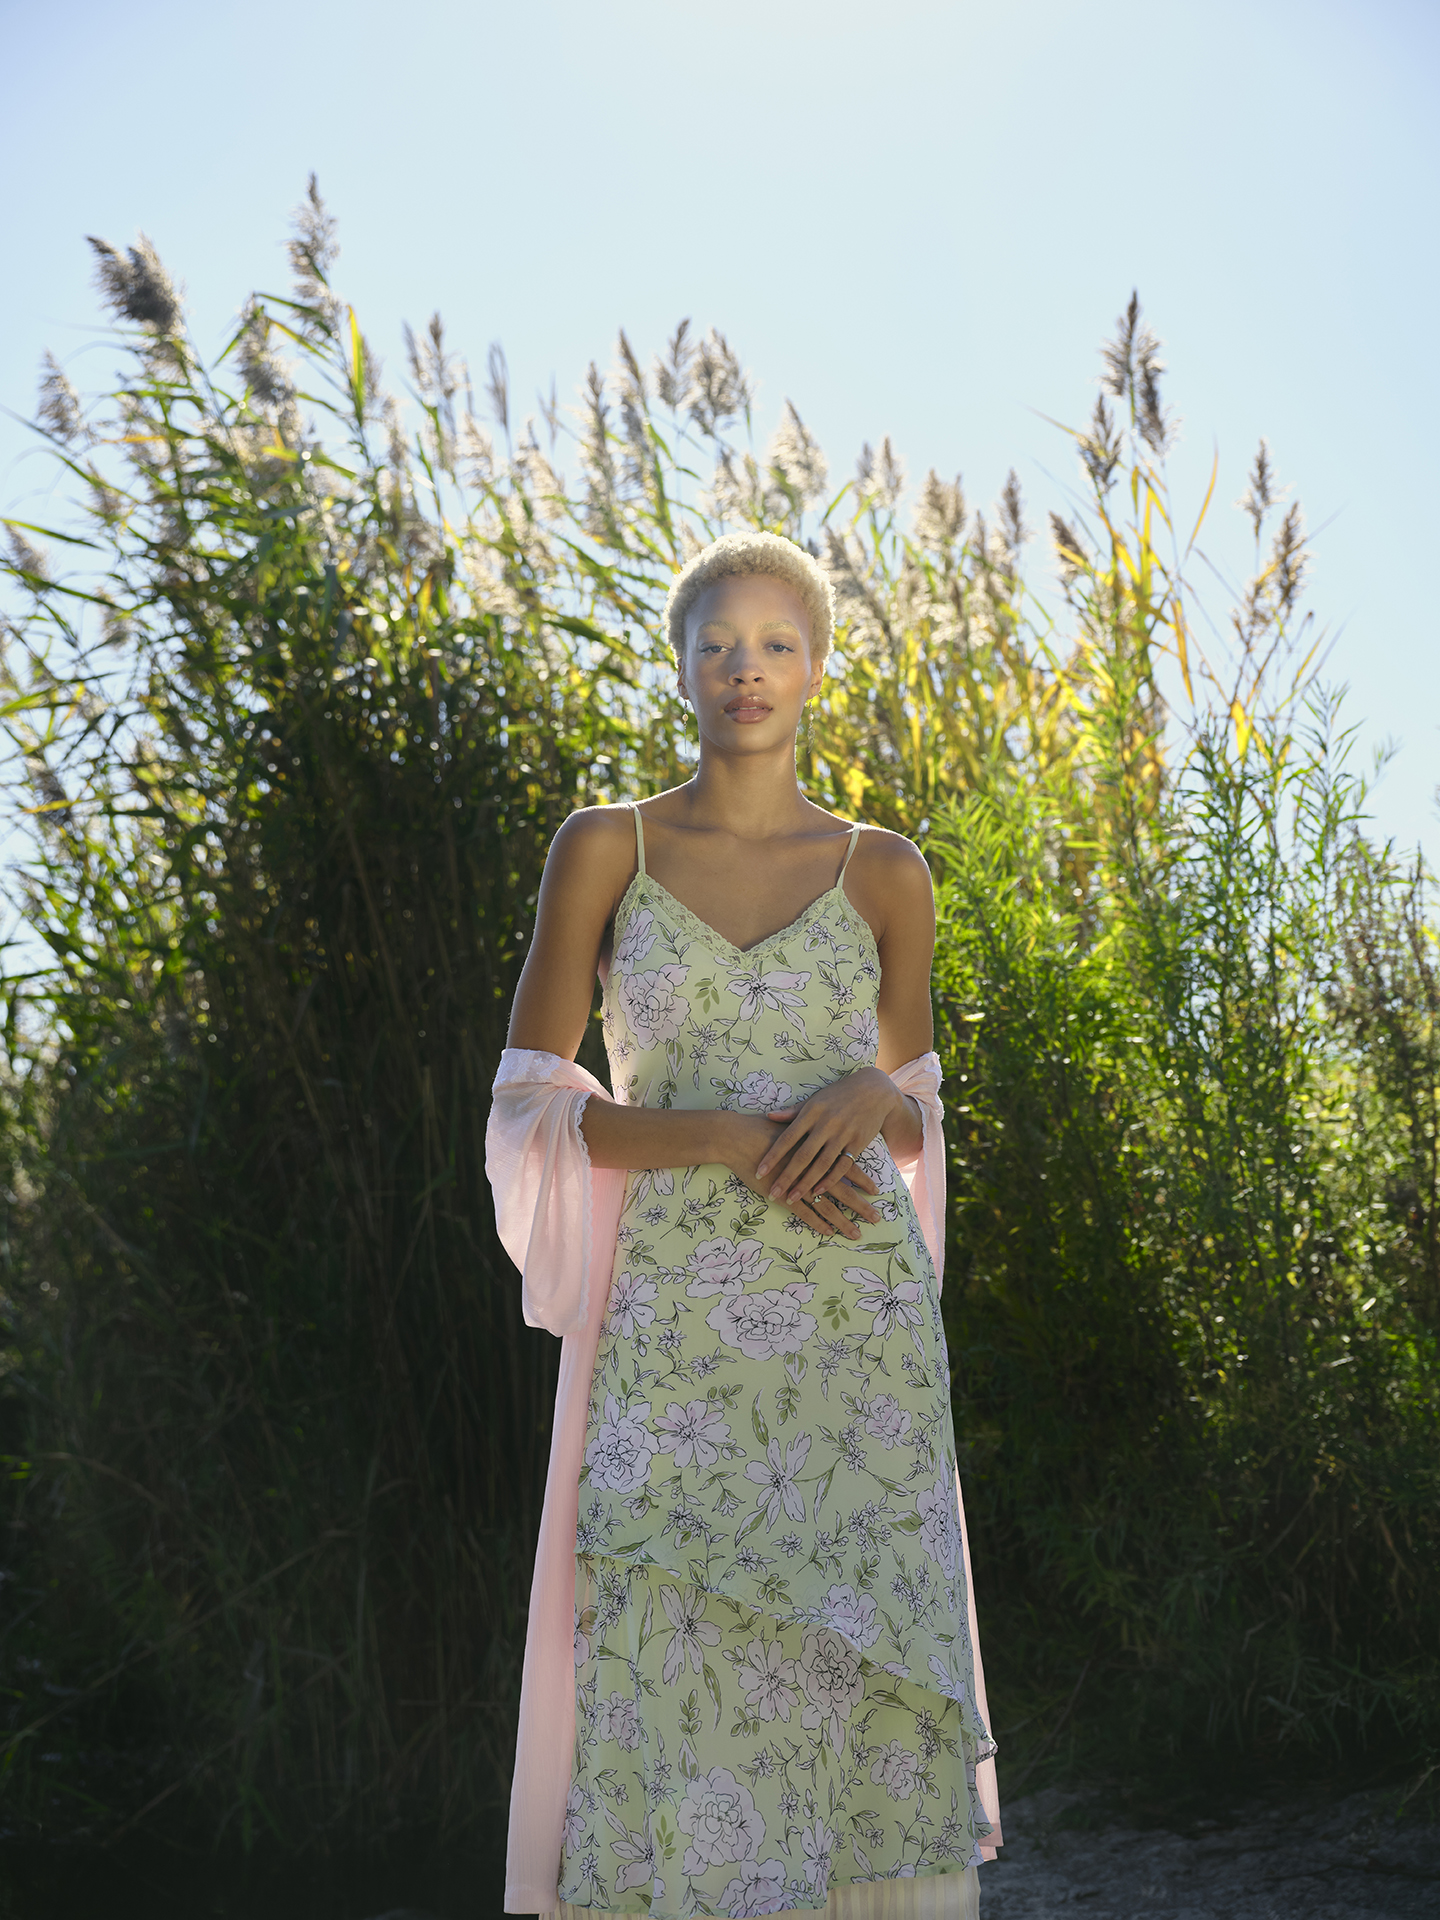 In this image, the subject is a light skinned model wearing a silky green dress covered in flowers with a pink scarf around her arms. She is standing in the middle of the composition facing the camera in front of lush green high grass that towers above her.